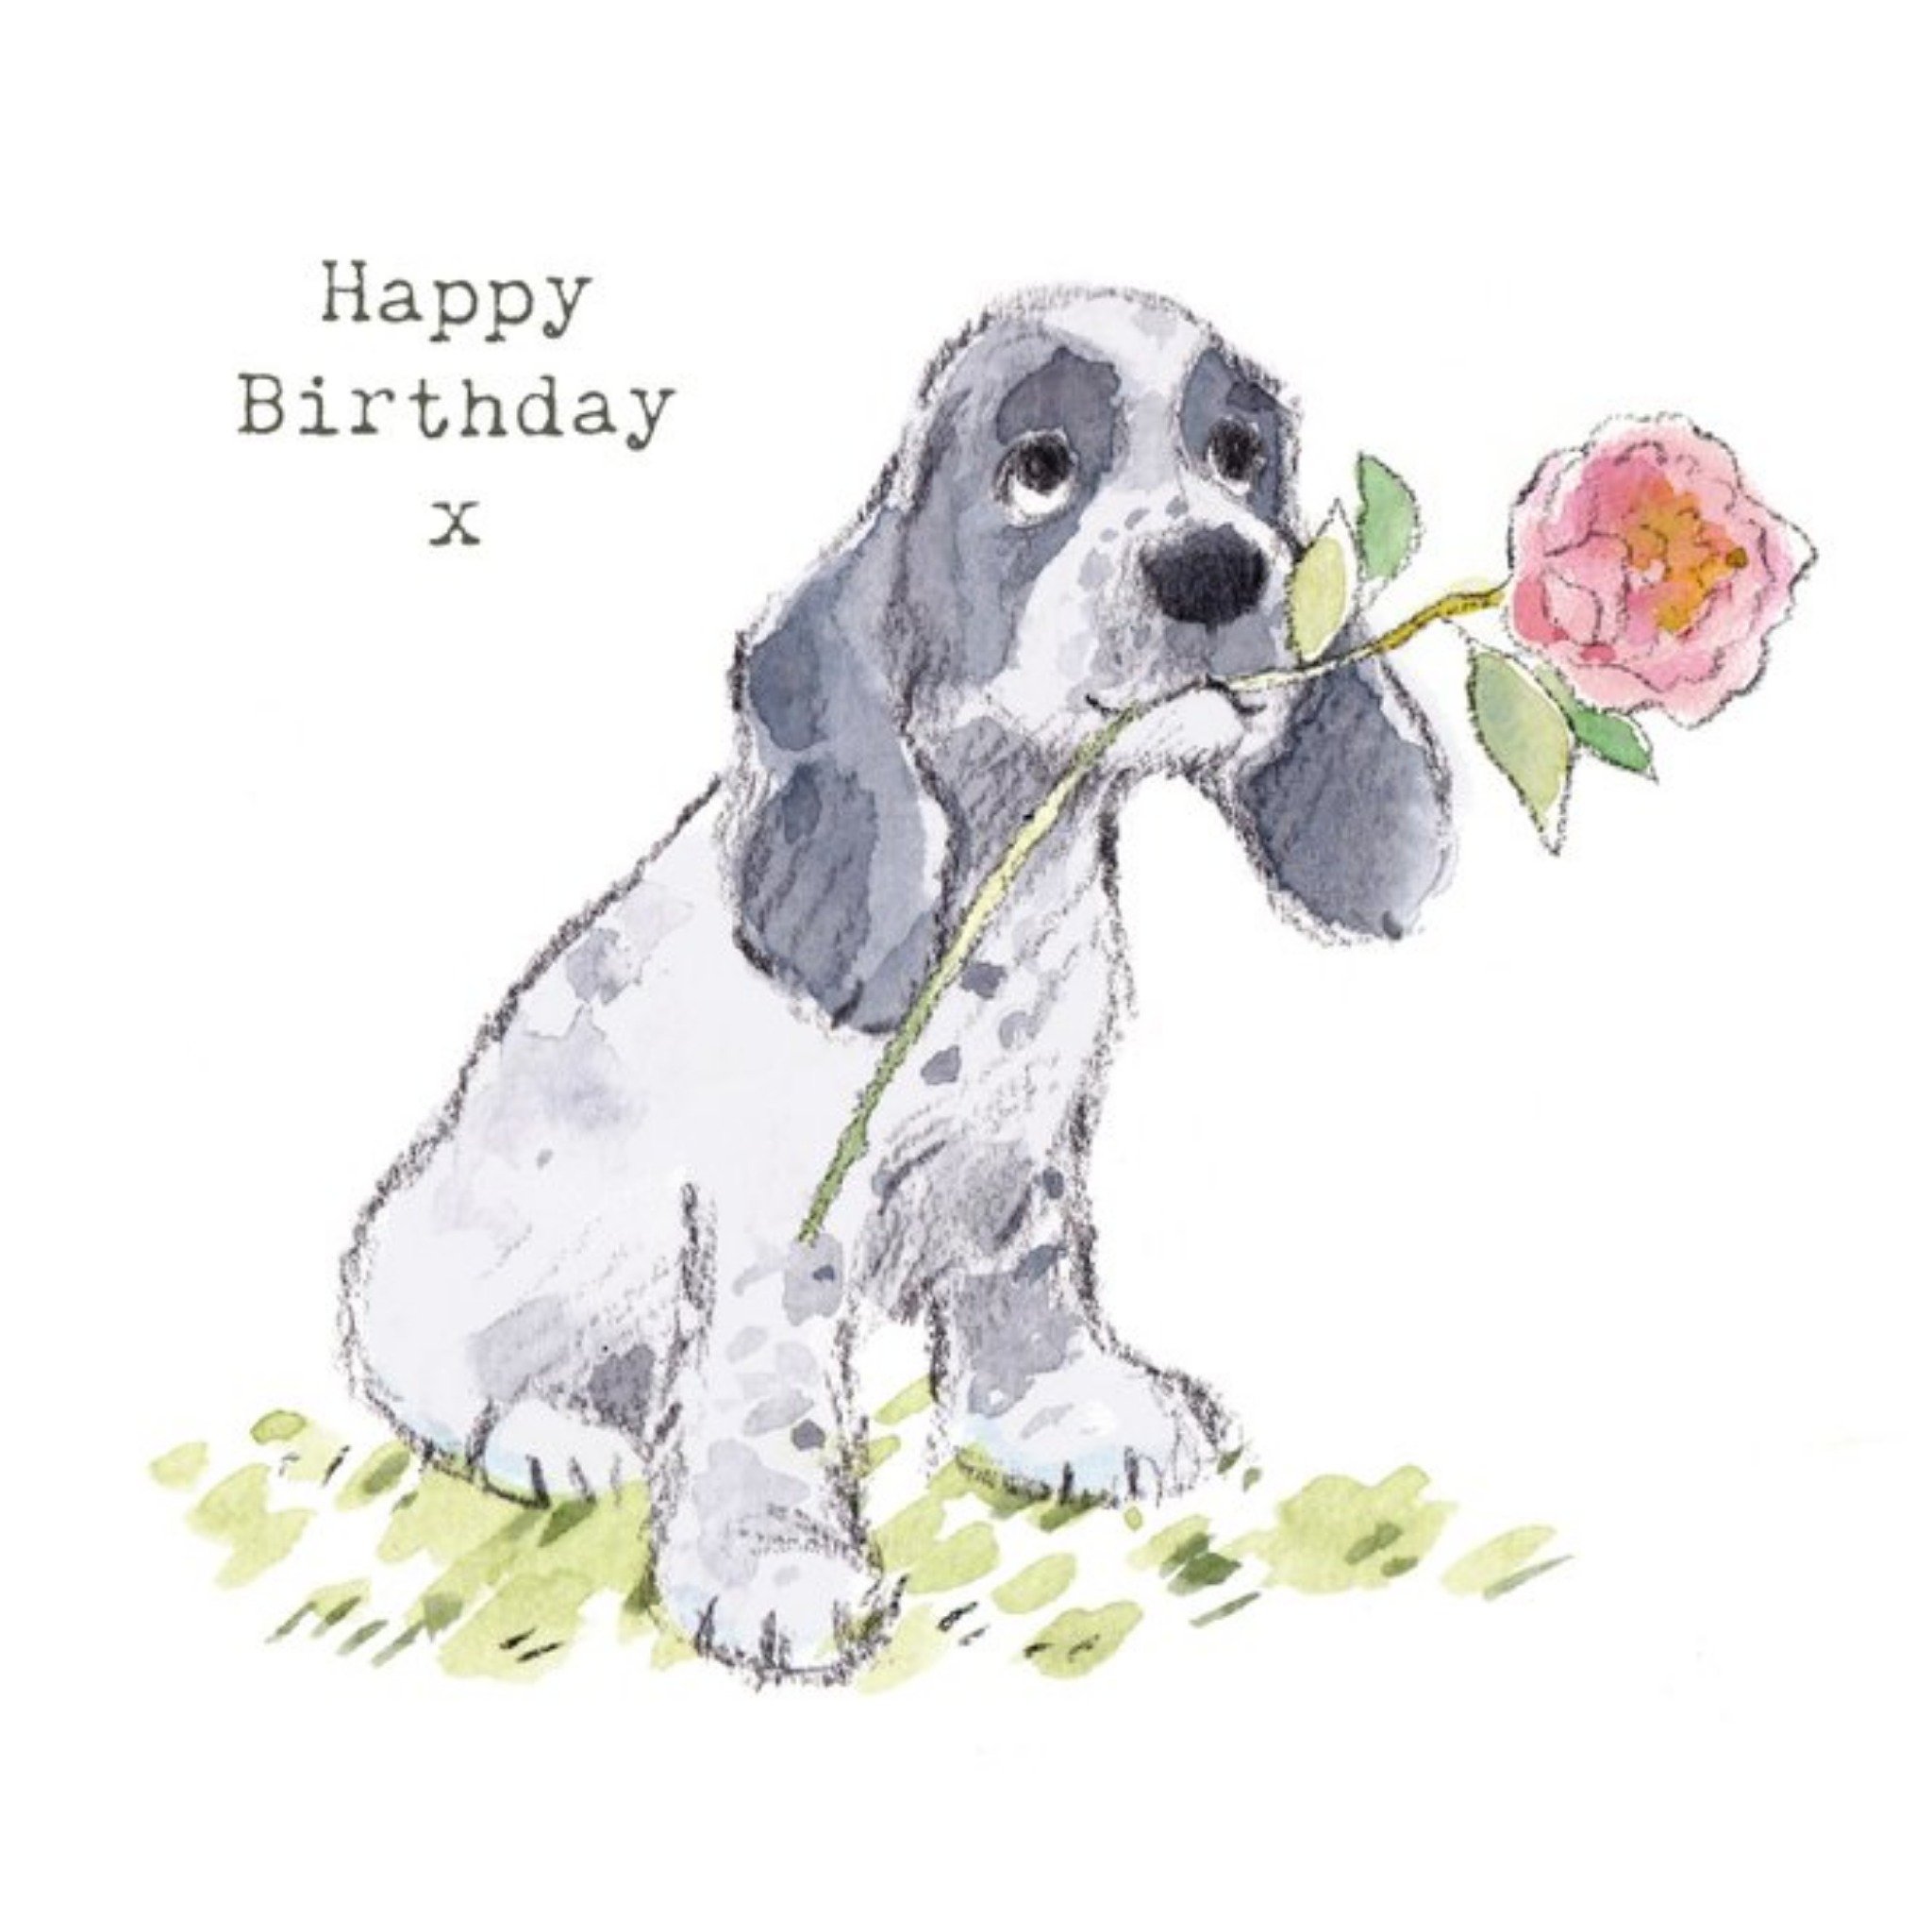 Moonpig Illustration Of A Cute Cocker Spaniel With A Rose Birthday Card, Square